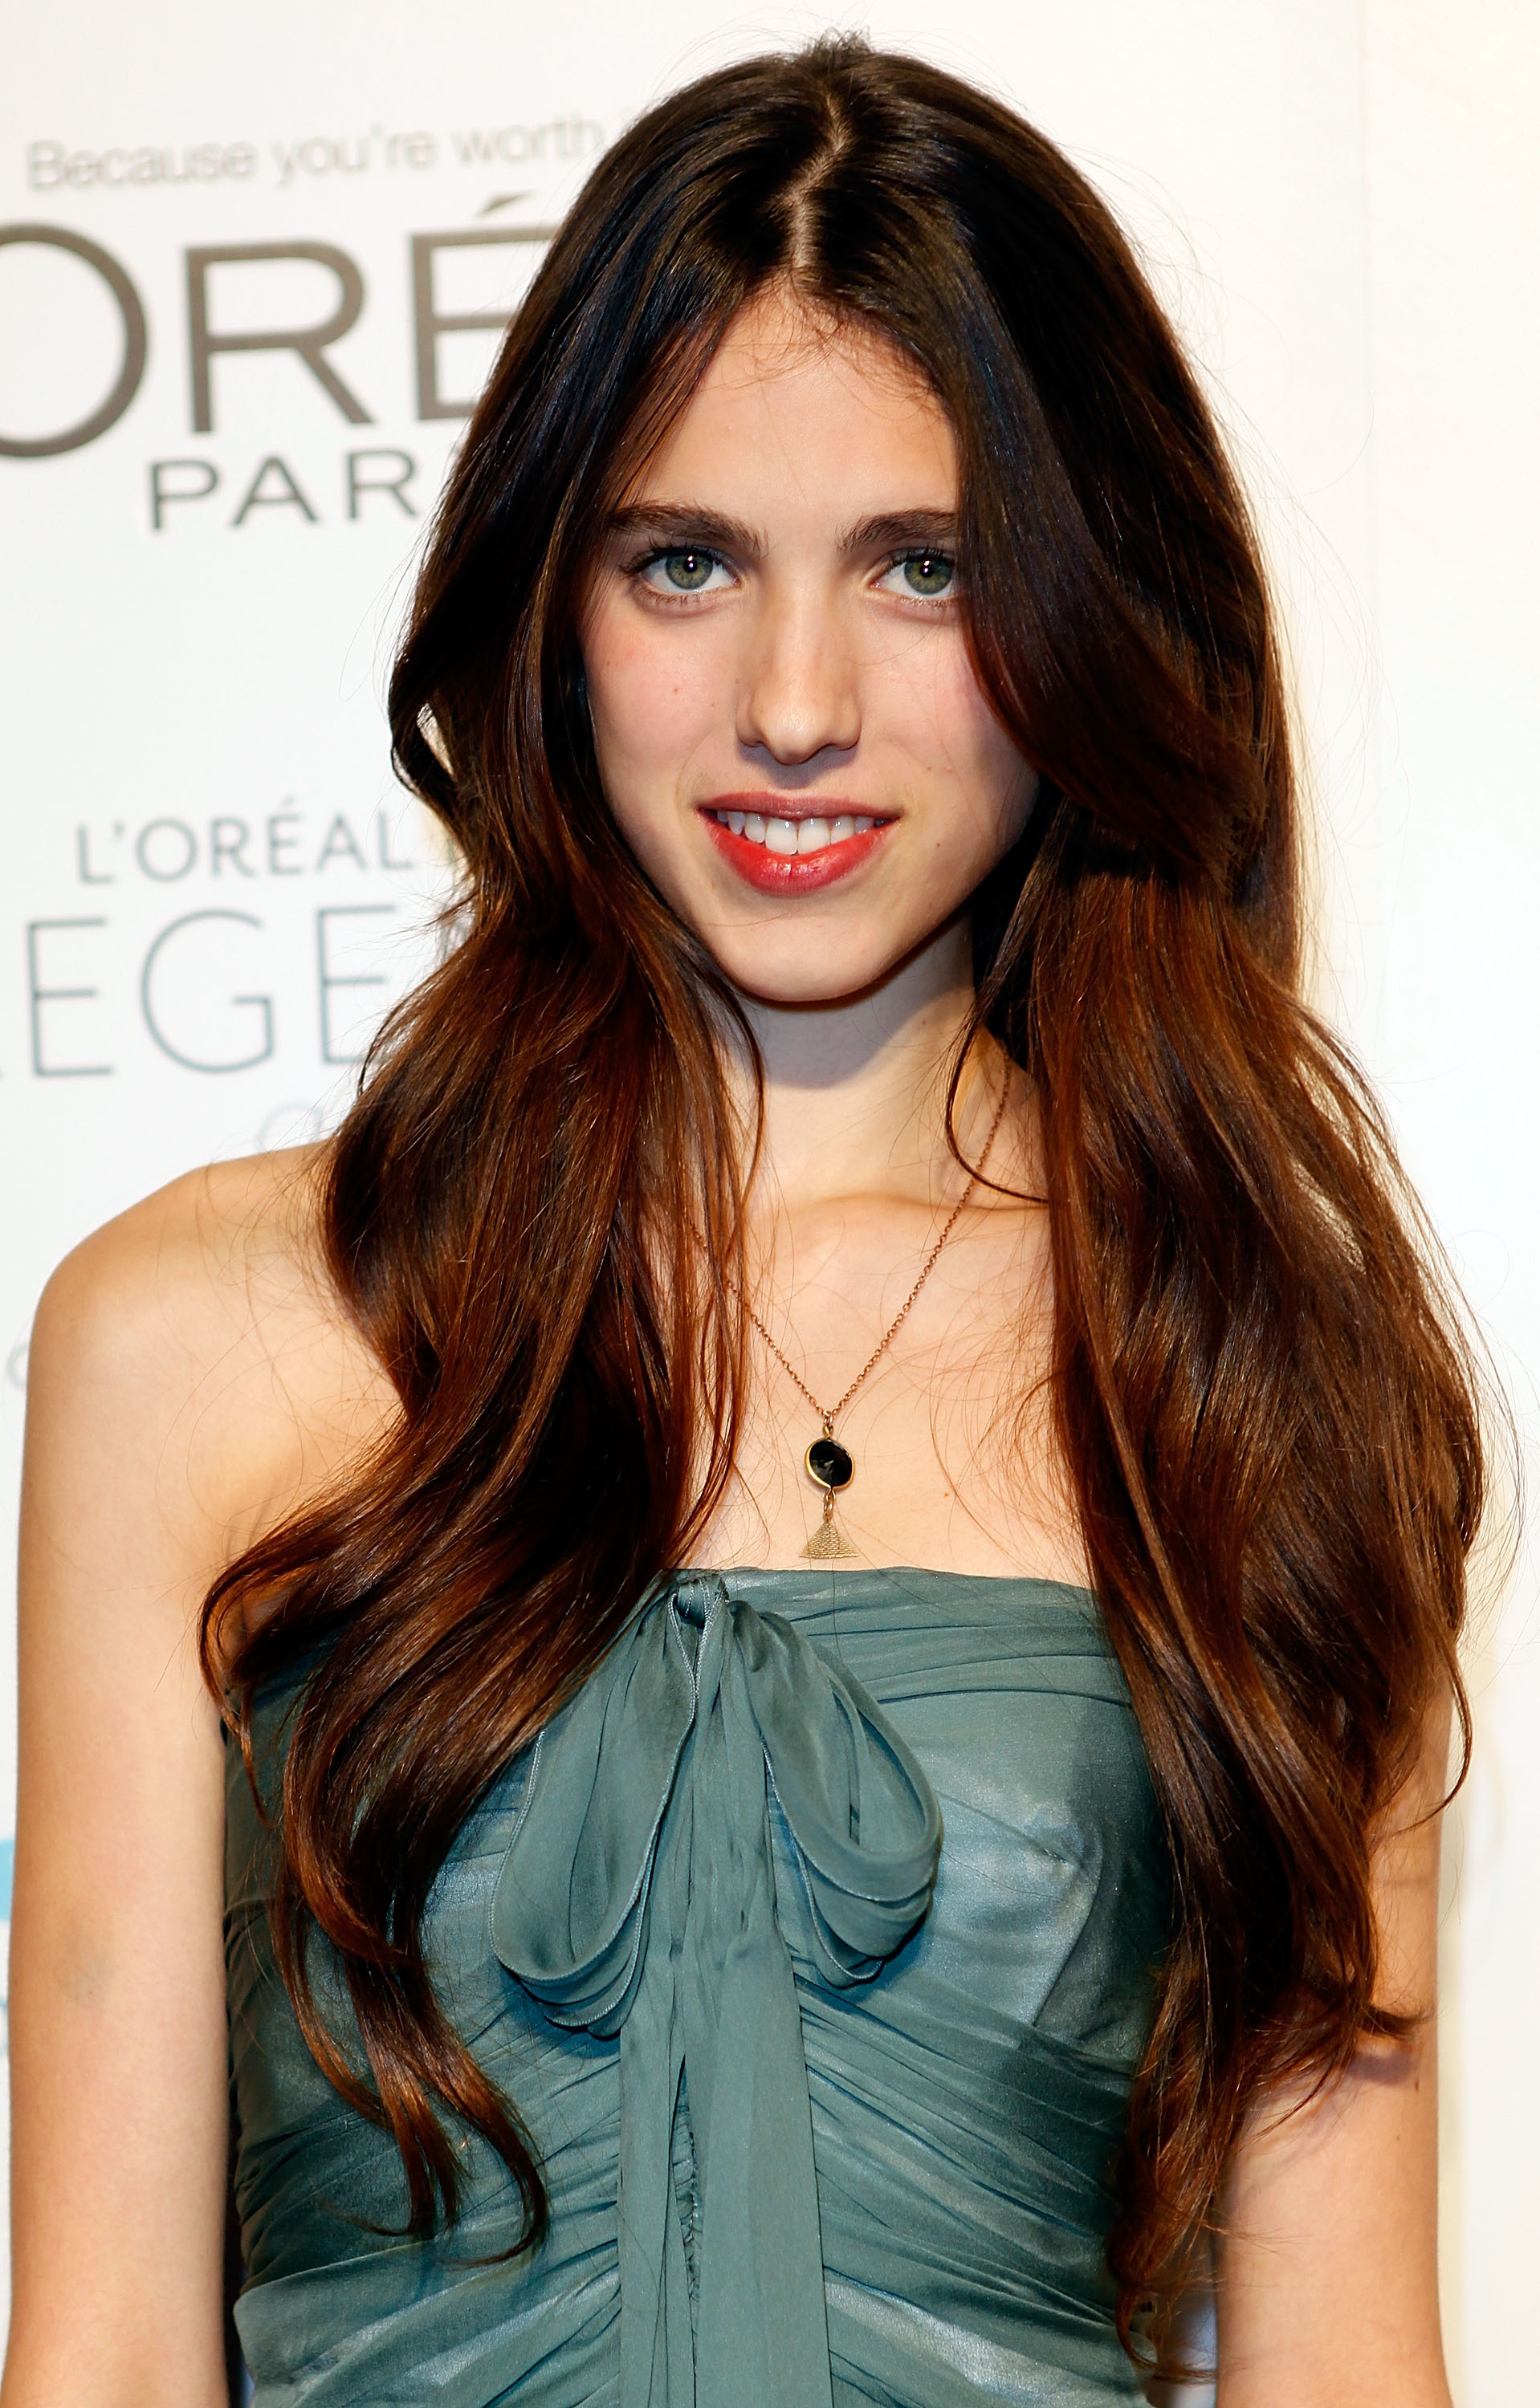 Margaret Qualley attends the 2011 L'Oreal Legends Gala on November 2, 2011 in New York City | Source: Getty Images